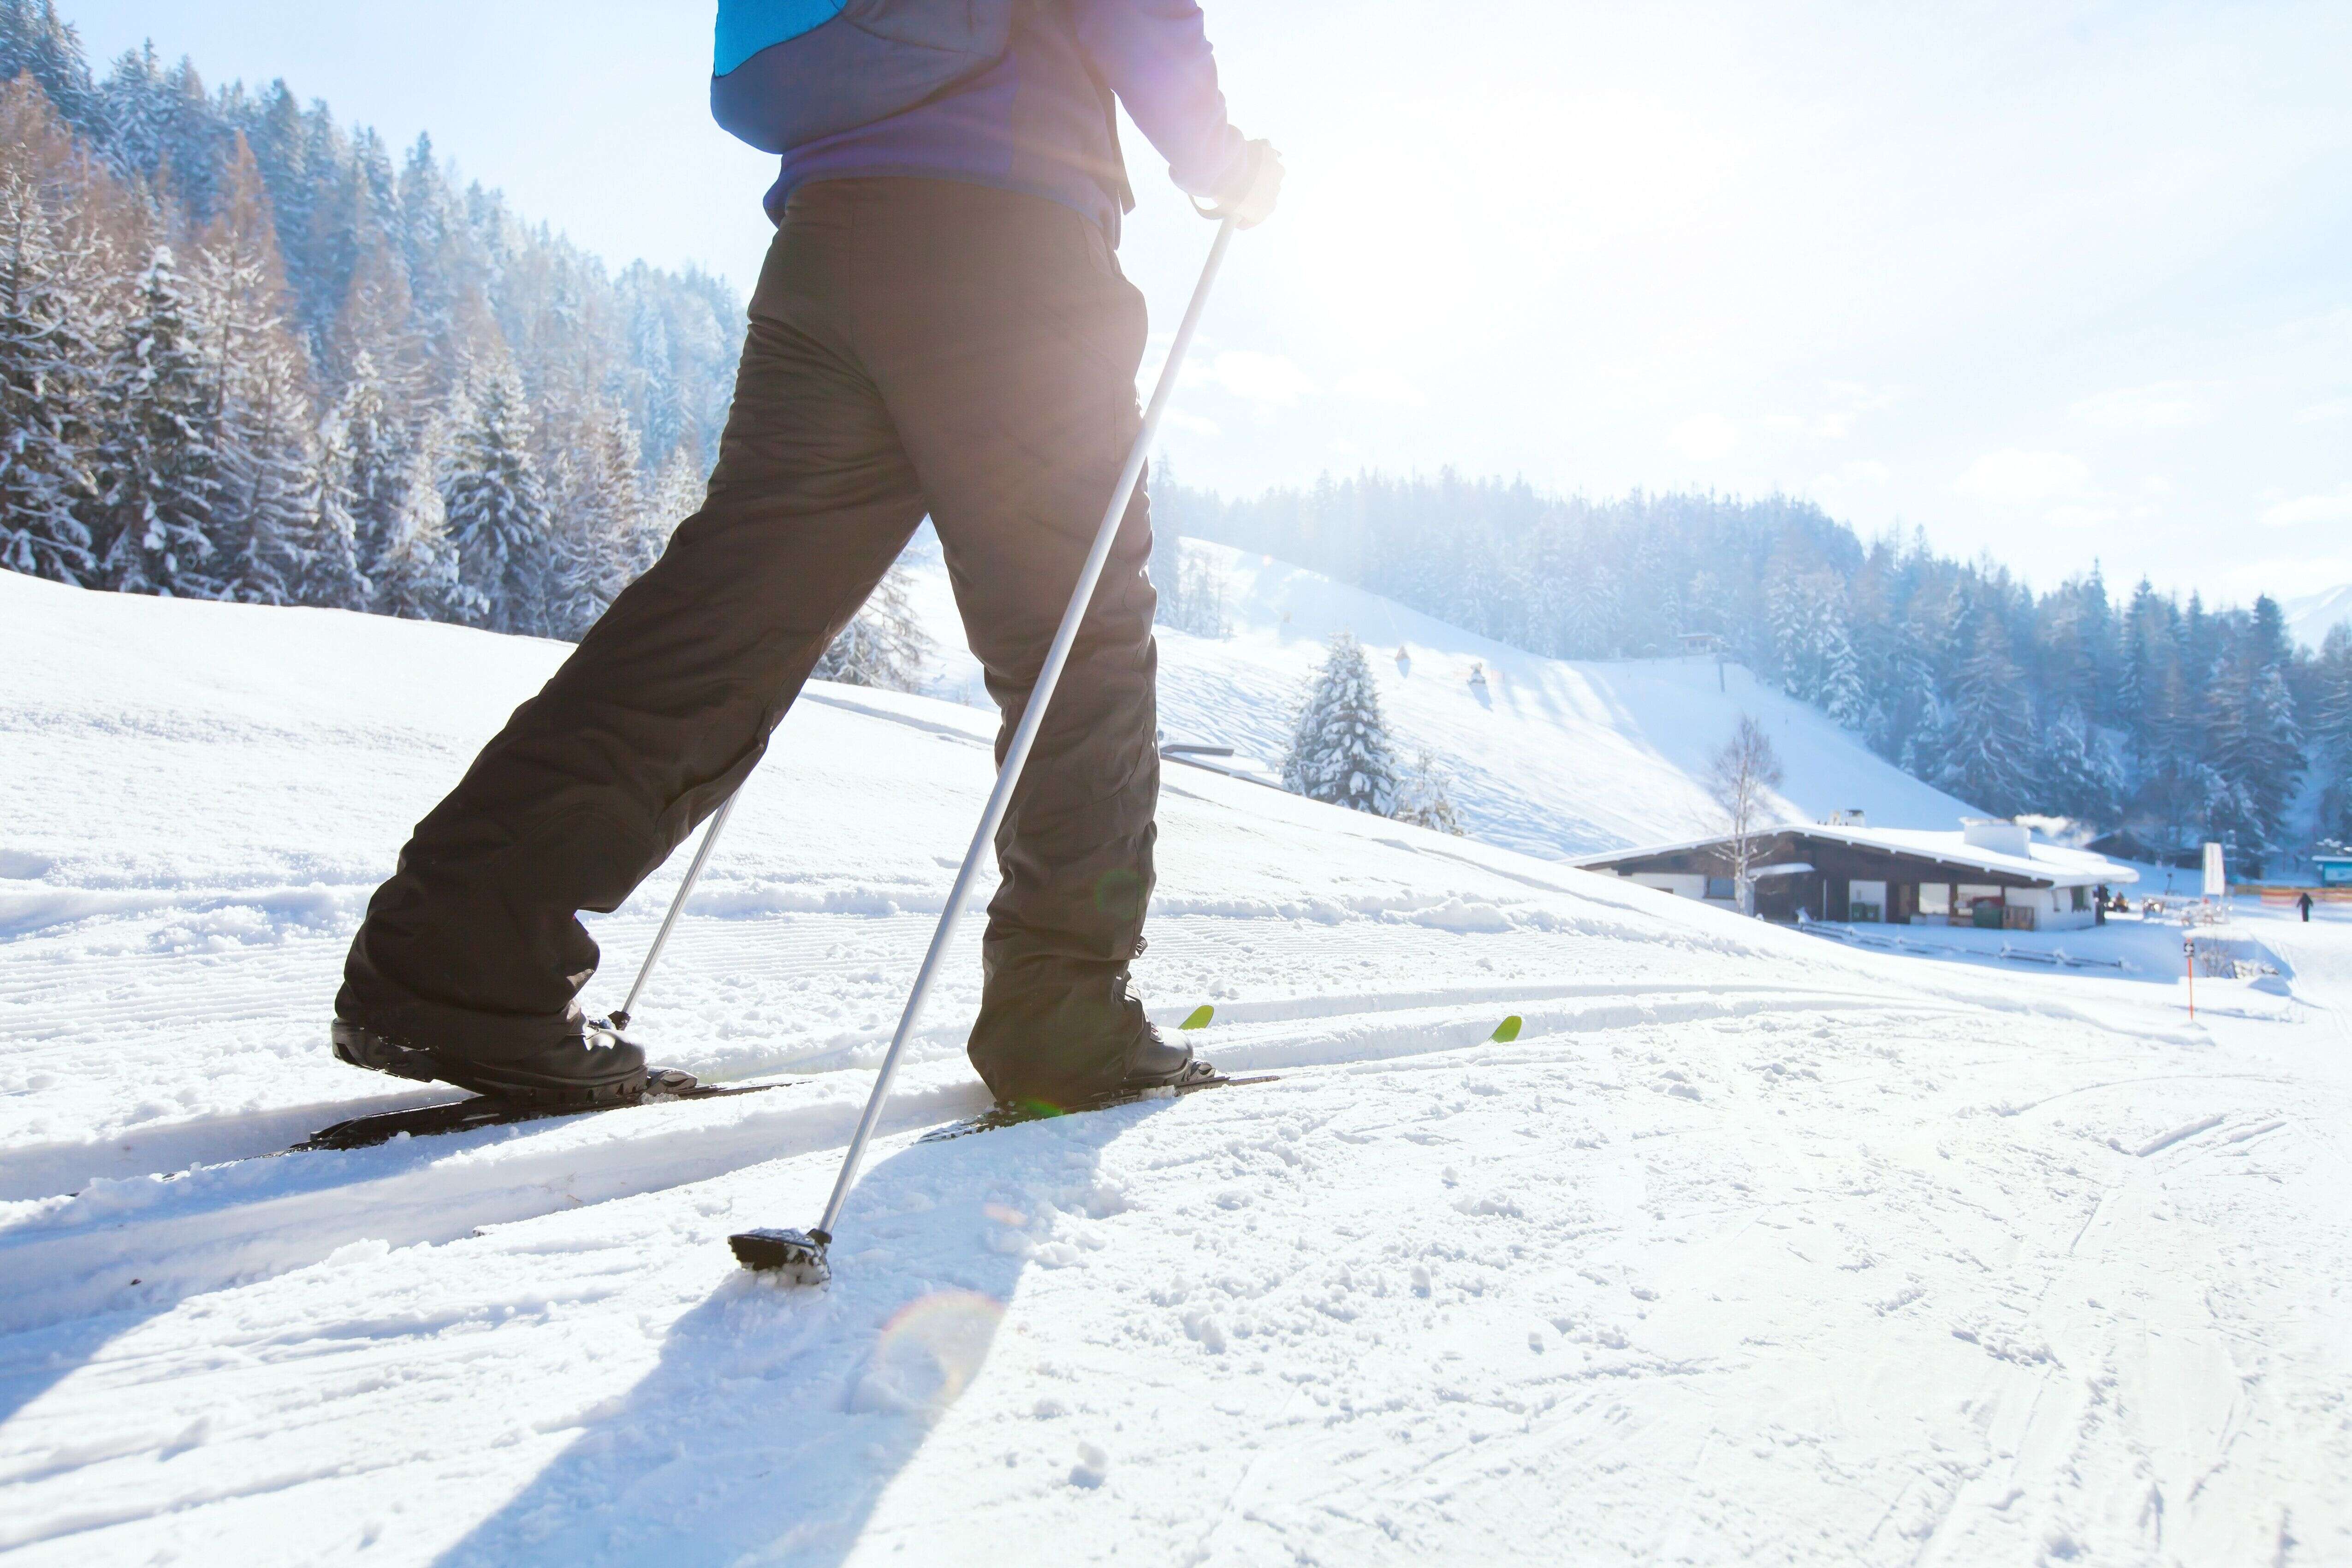 nordic skiing, winter holidays in Alps, cross country skier in mountains